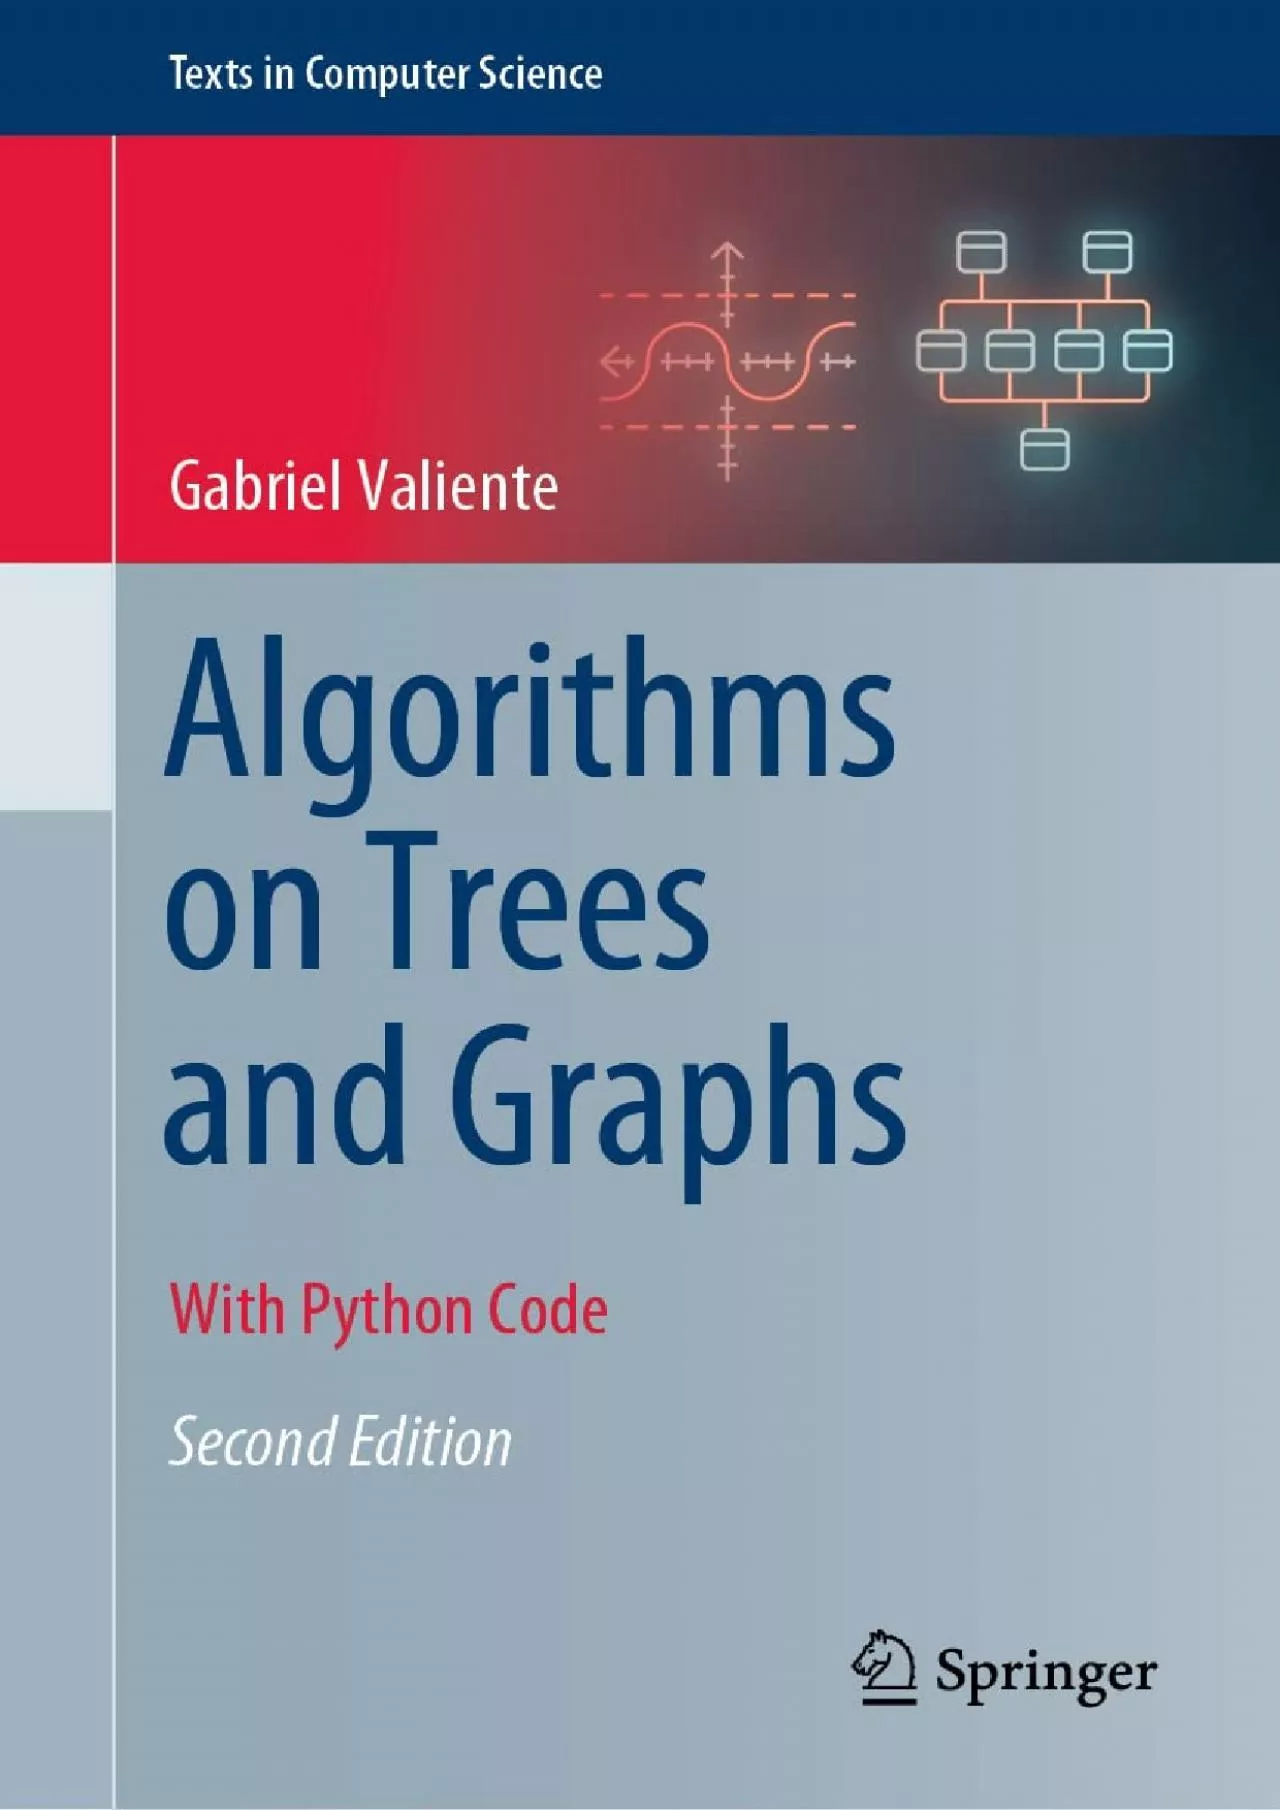 [eBOOK]-Algorithms on Trees and Graphs: With Python Code (Texts in Computer Science)